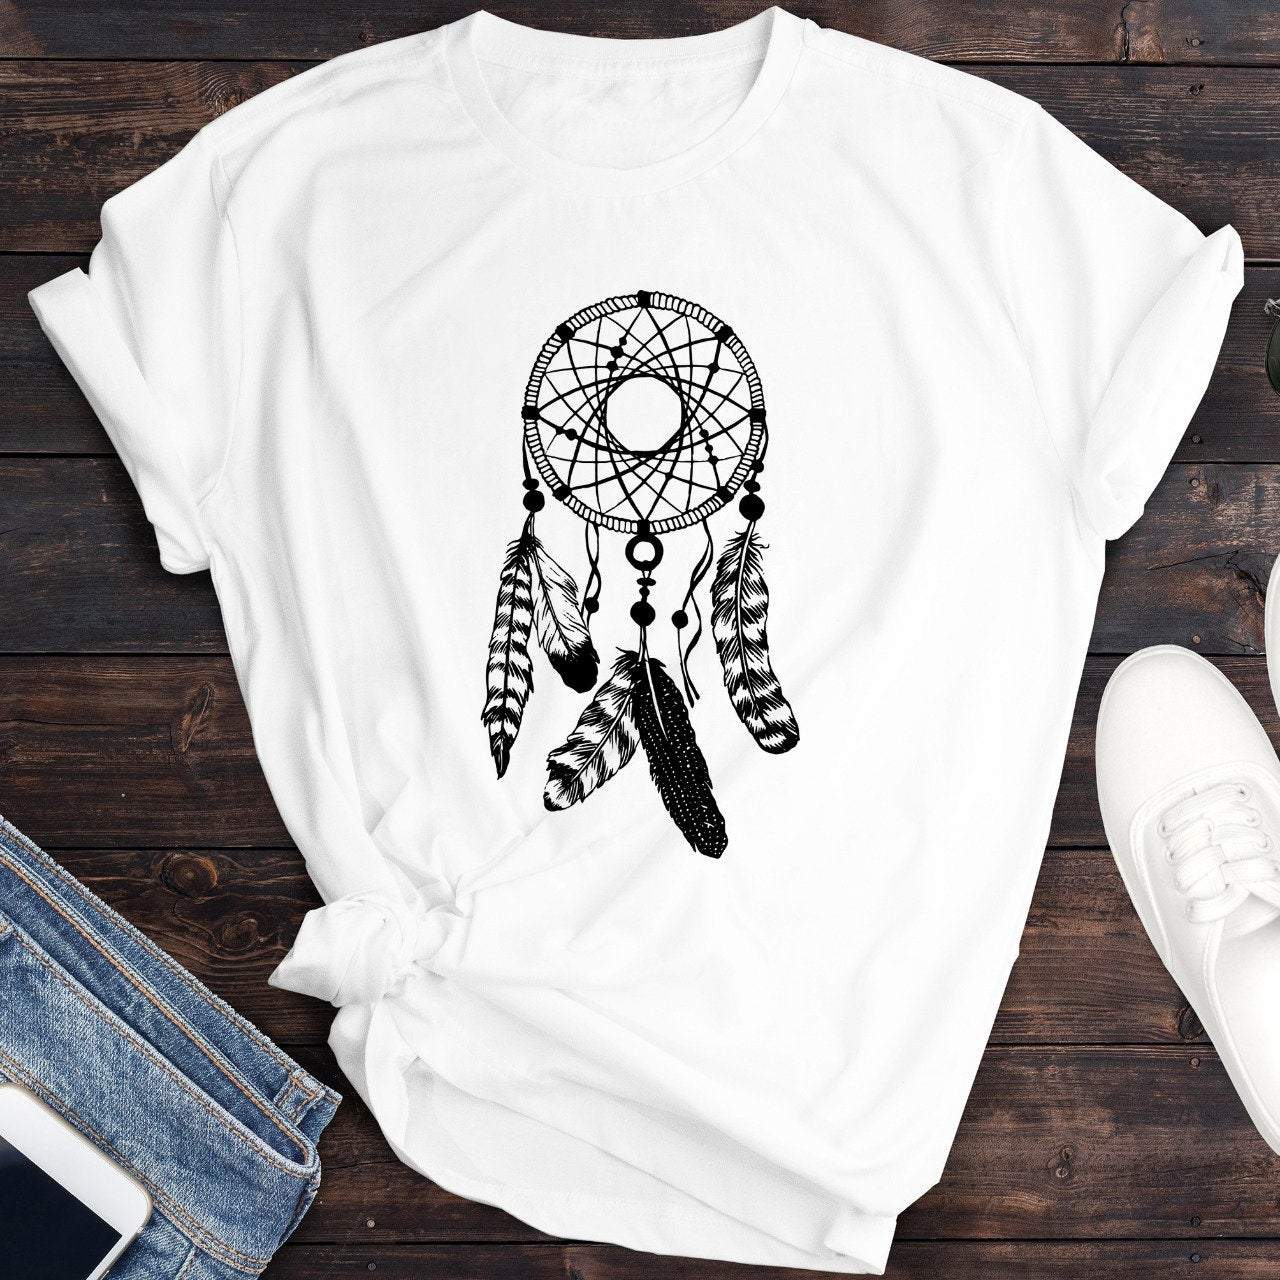 Dreamcatcher T-Shirt for men and women, Gift for him and her, Camping T Shirt